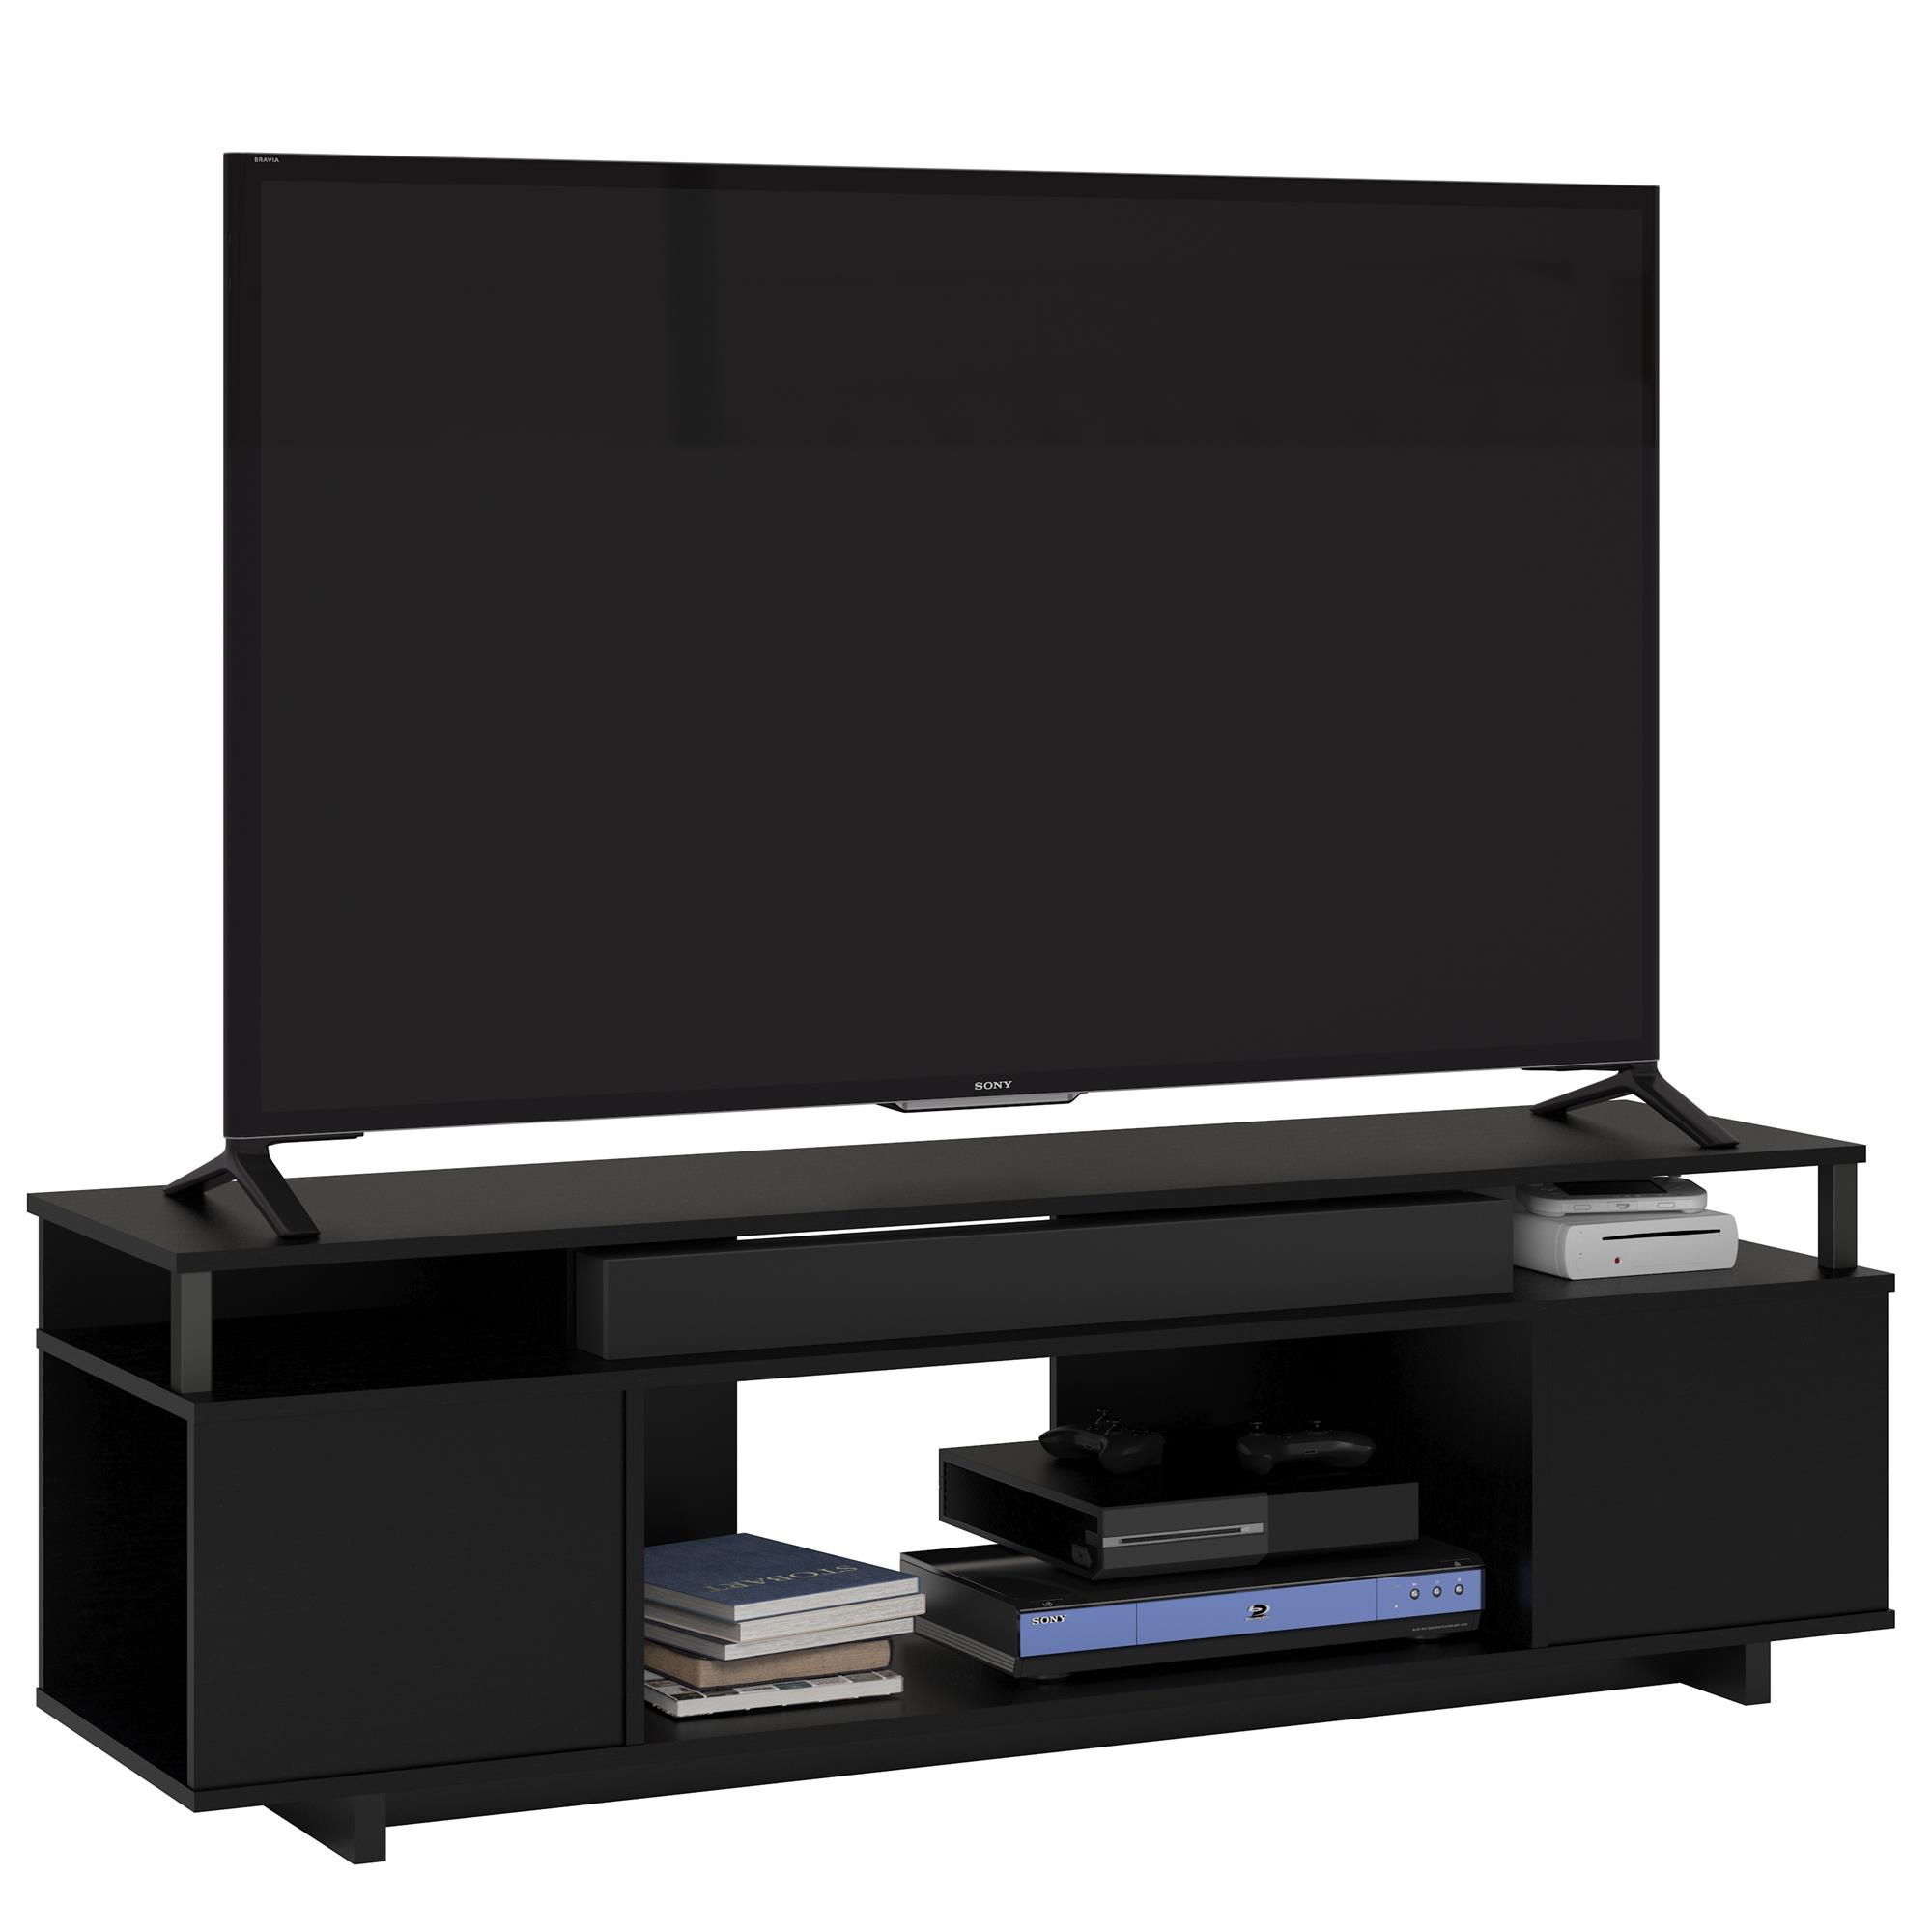 Ameriwood Home Carson TV Stand for TVs up to 65", Black Oak - image 5 of 6